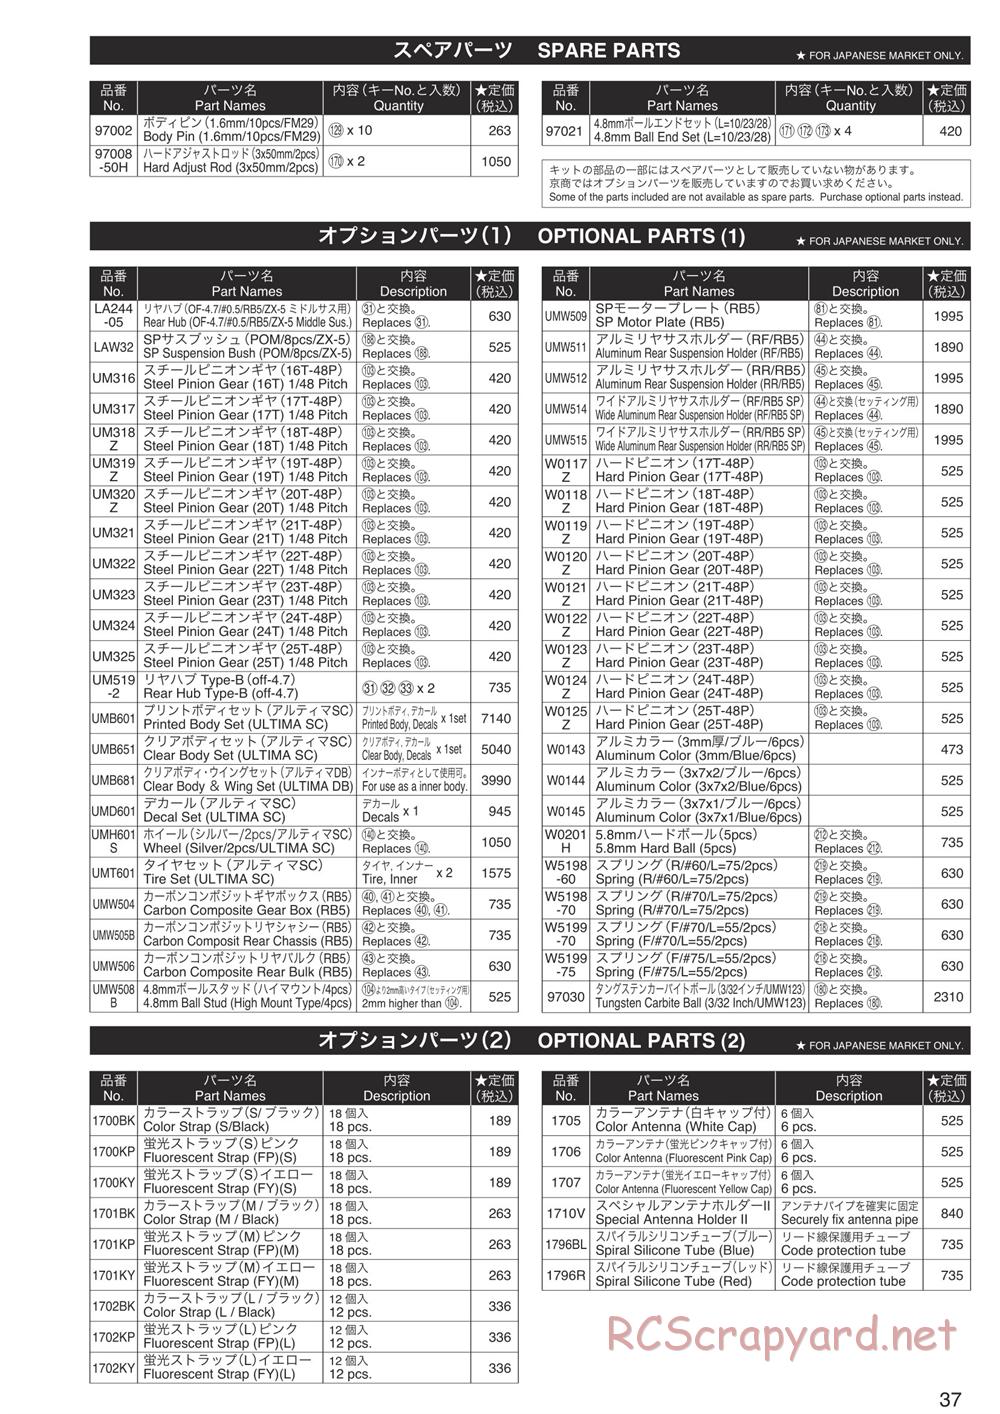 Kyosho - Ultima SCR - Parts List - Page 2